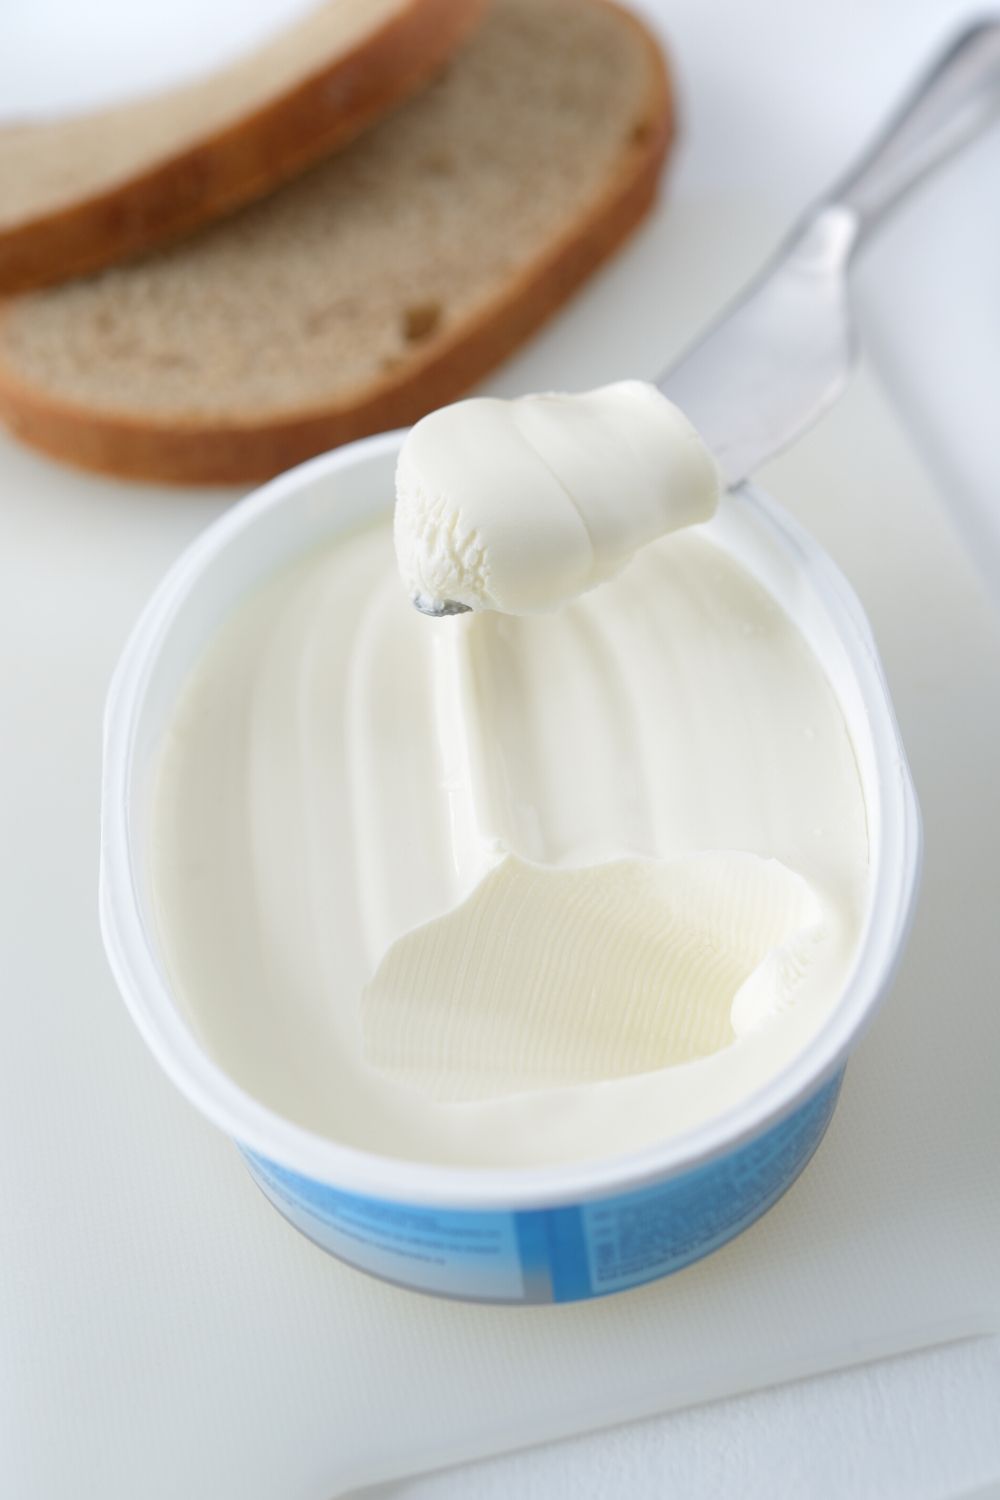 cream cheese in a container, with some scooped out on a knife.